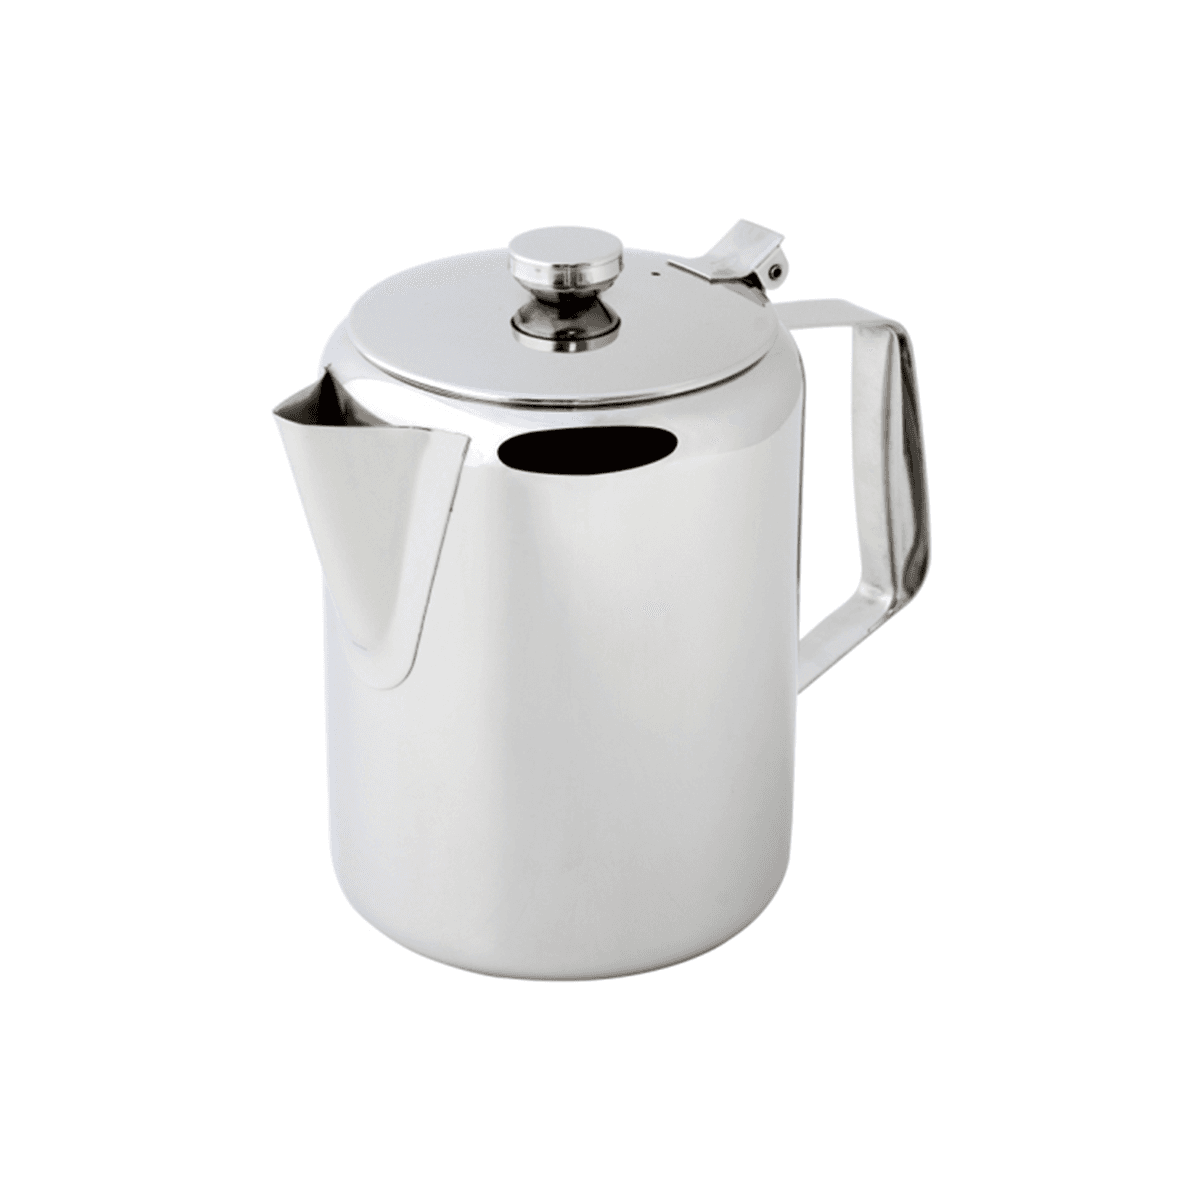 Sunnex Coffee Pot Stainless Steel 600 ml Silver Stainless Steel